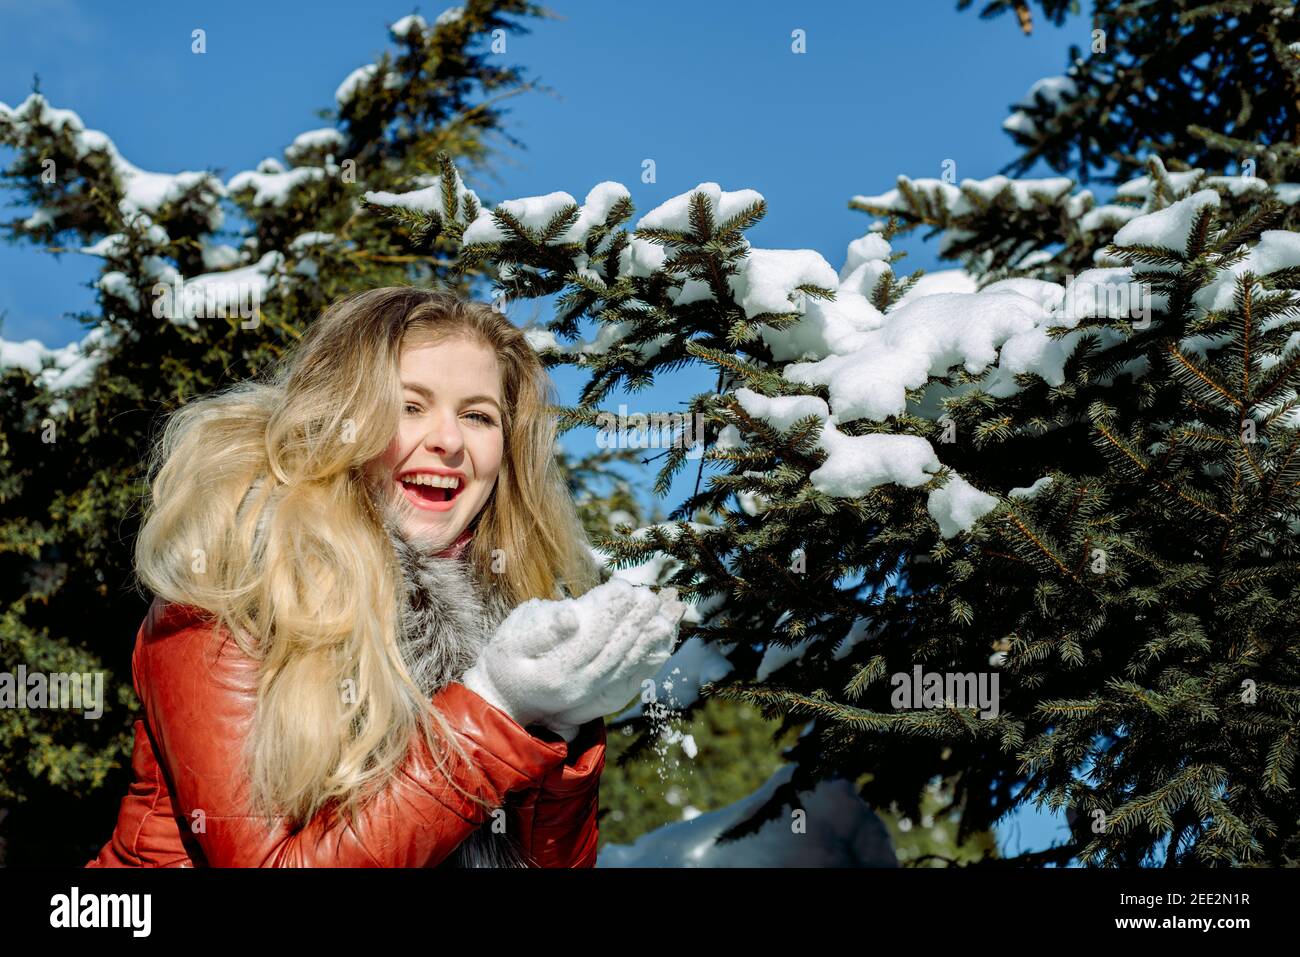 Emotional blue-eyed girl blowing snow in her hands. Frosty winter. Stock Photo